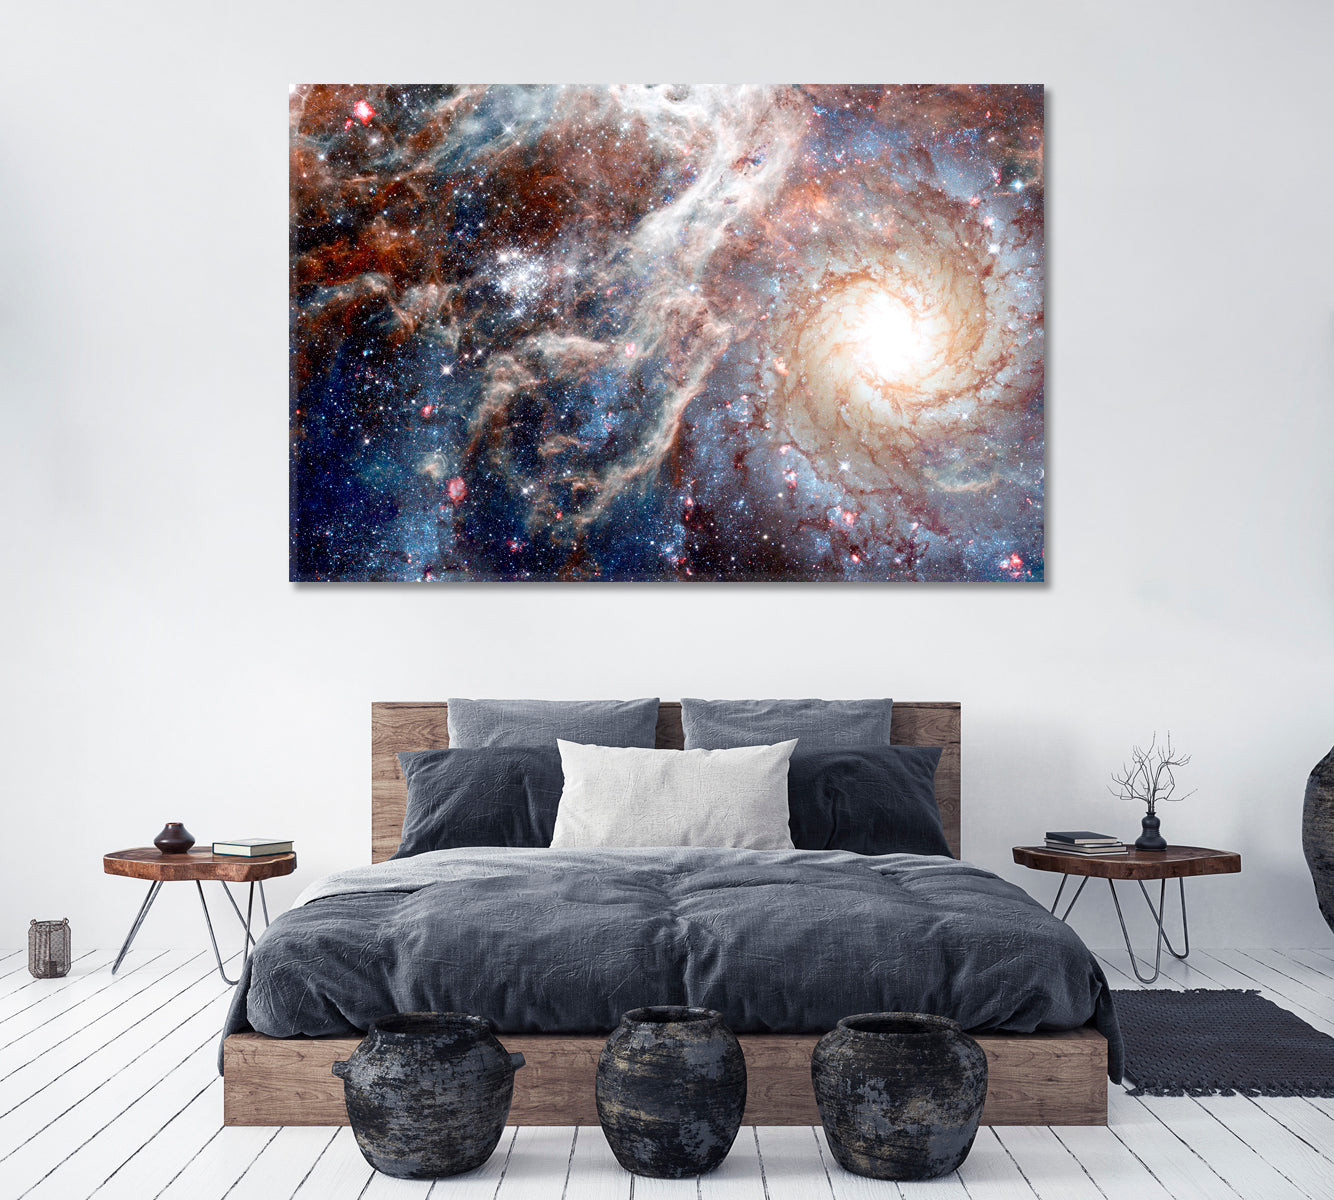 Spiral Galaxies and Nebula in Deep Space Canvas Print ArtLexy 1 Panel 24"x16" inches 